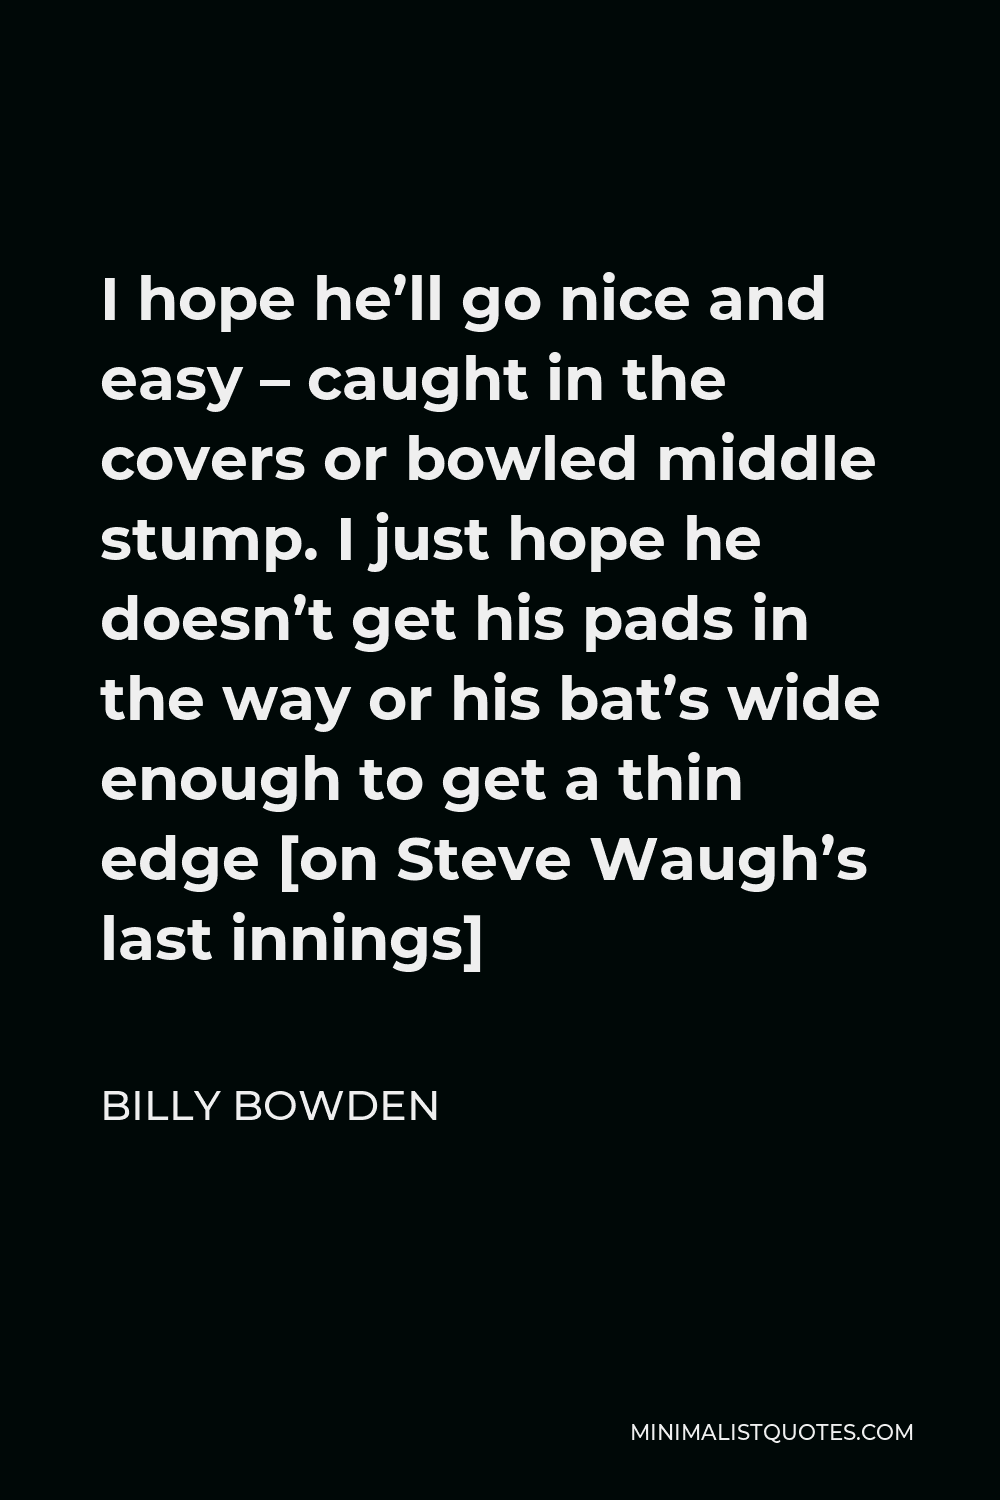 Billy Bowden Quote - I hope he’ll go nice and easy – caught in the covers or bowled middle stump. I just hope he doesn’t get his pads in the way or his bat’s wide enough to get a thin edge [on Steve Waugh’s last innings]